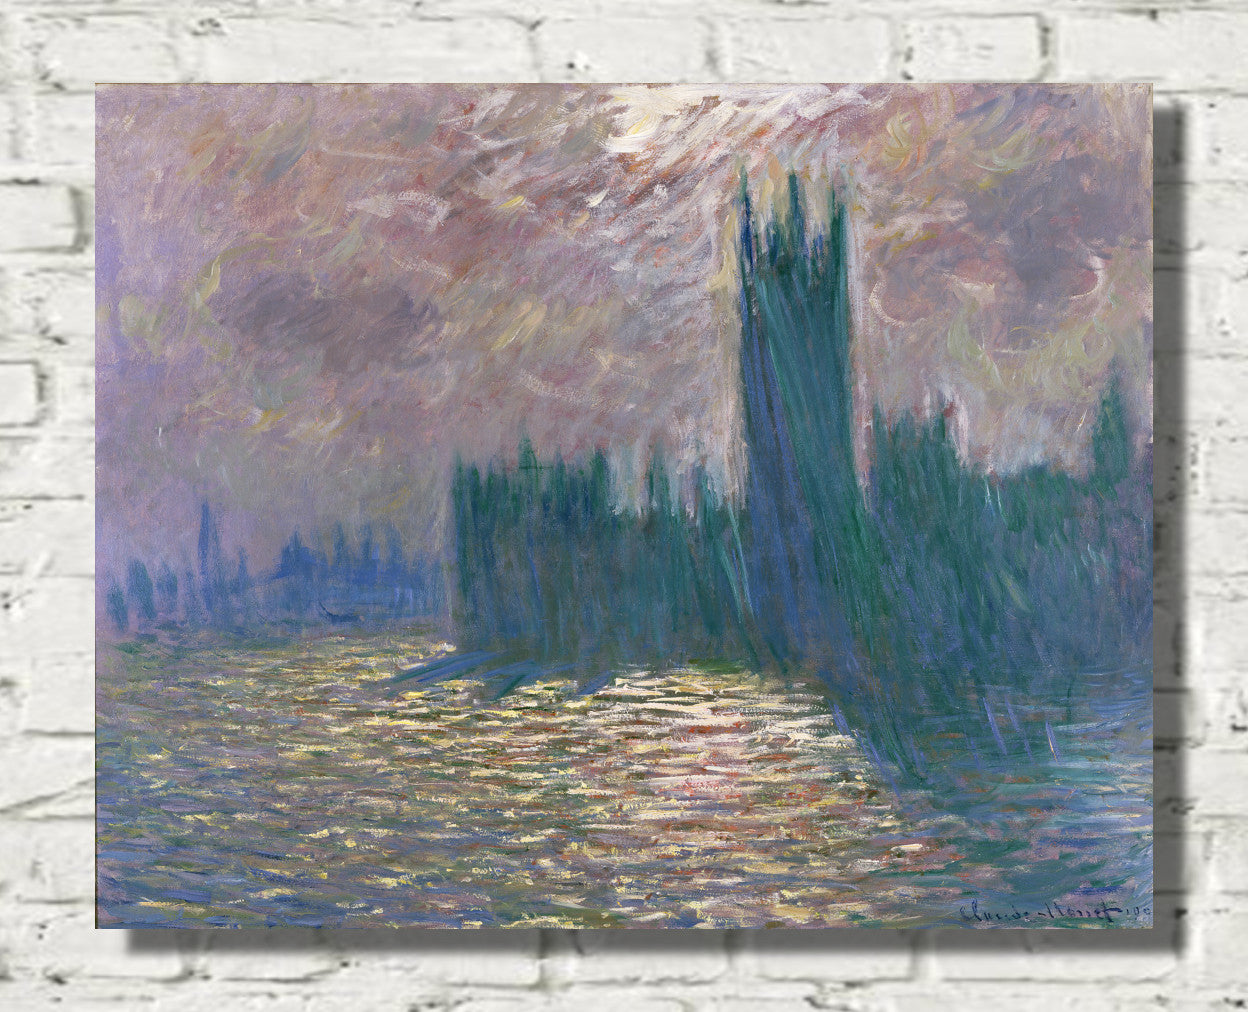 Houses of Parliament, Reflections on the Thames by Claude Monet